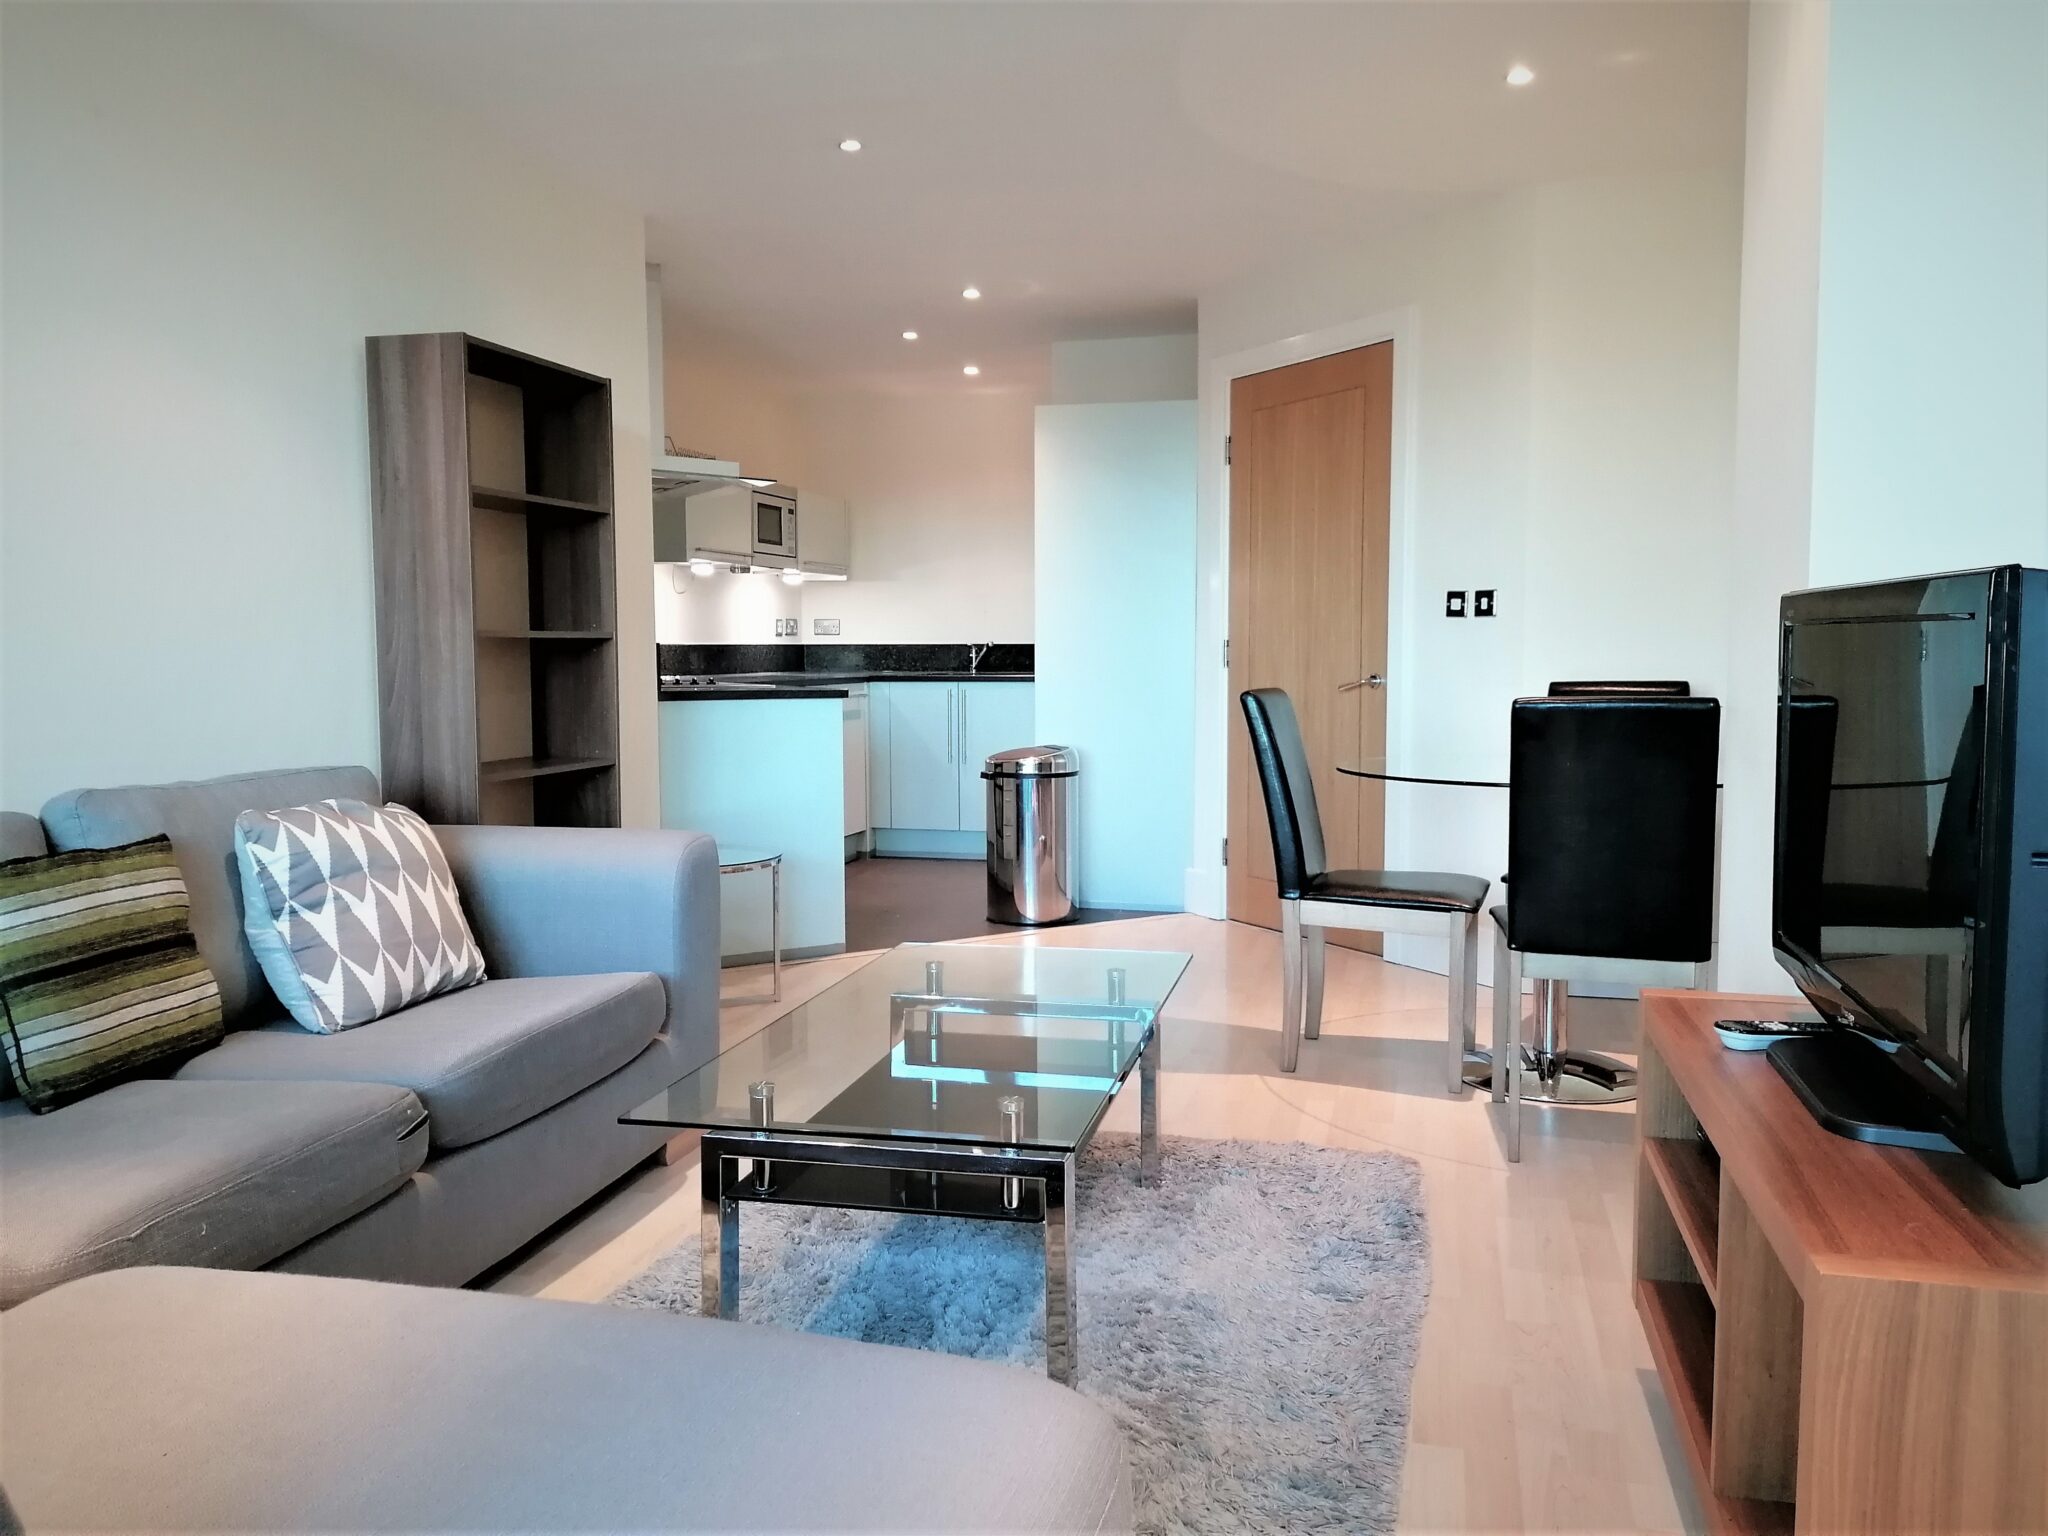 Vauxhall Serviced Accommodation - South London Serviced Apartments - London | Urban Stay